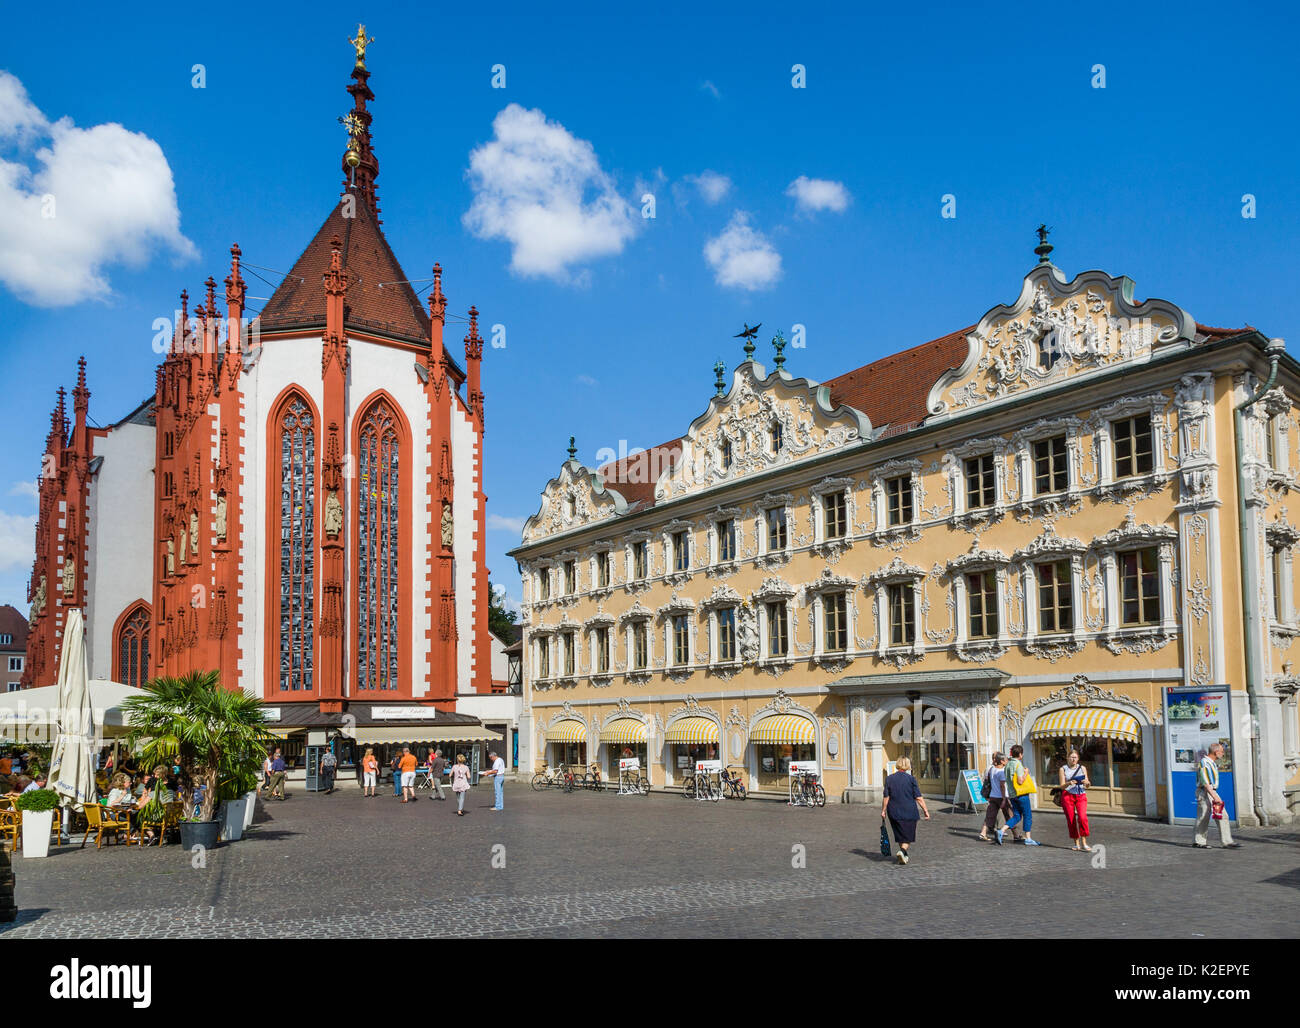 Germany, Bavaria, Frankonia, Würzburg, market square with Marienkapelle, Church of Our Lady and Falkenhaus with splendid rococo stucco decoration Stock Photo